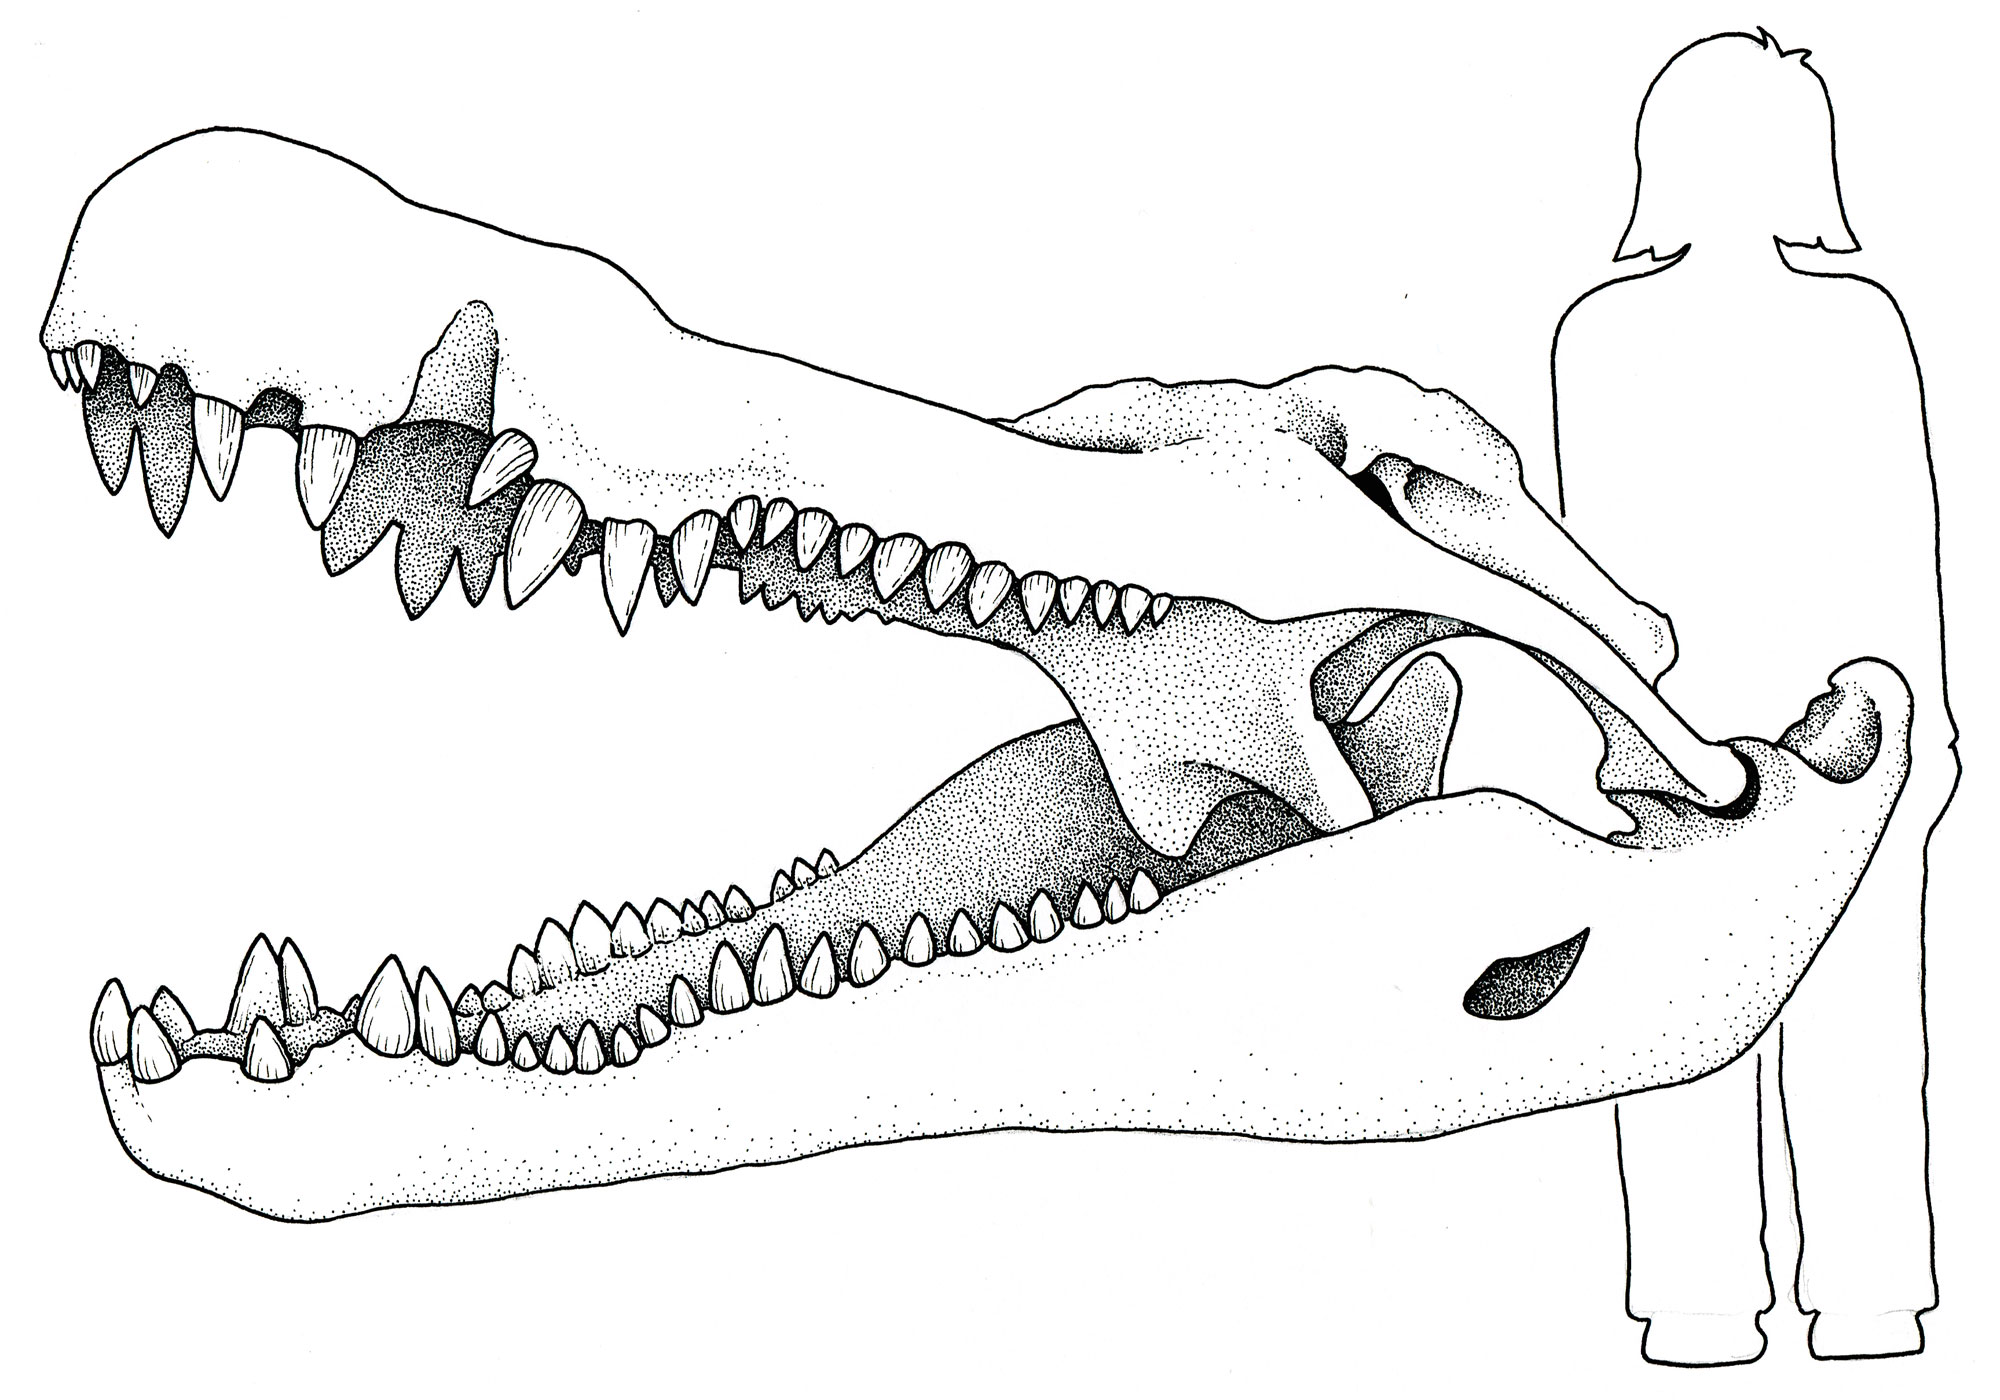 Drawing of the skull of Deinosuchus next to the outline of an adult human. The skull is longer than the human is tall.